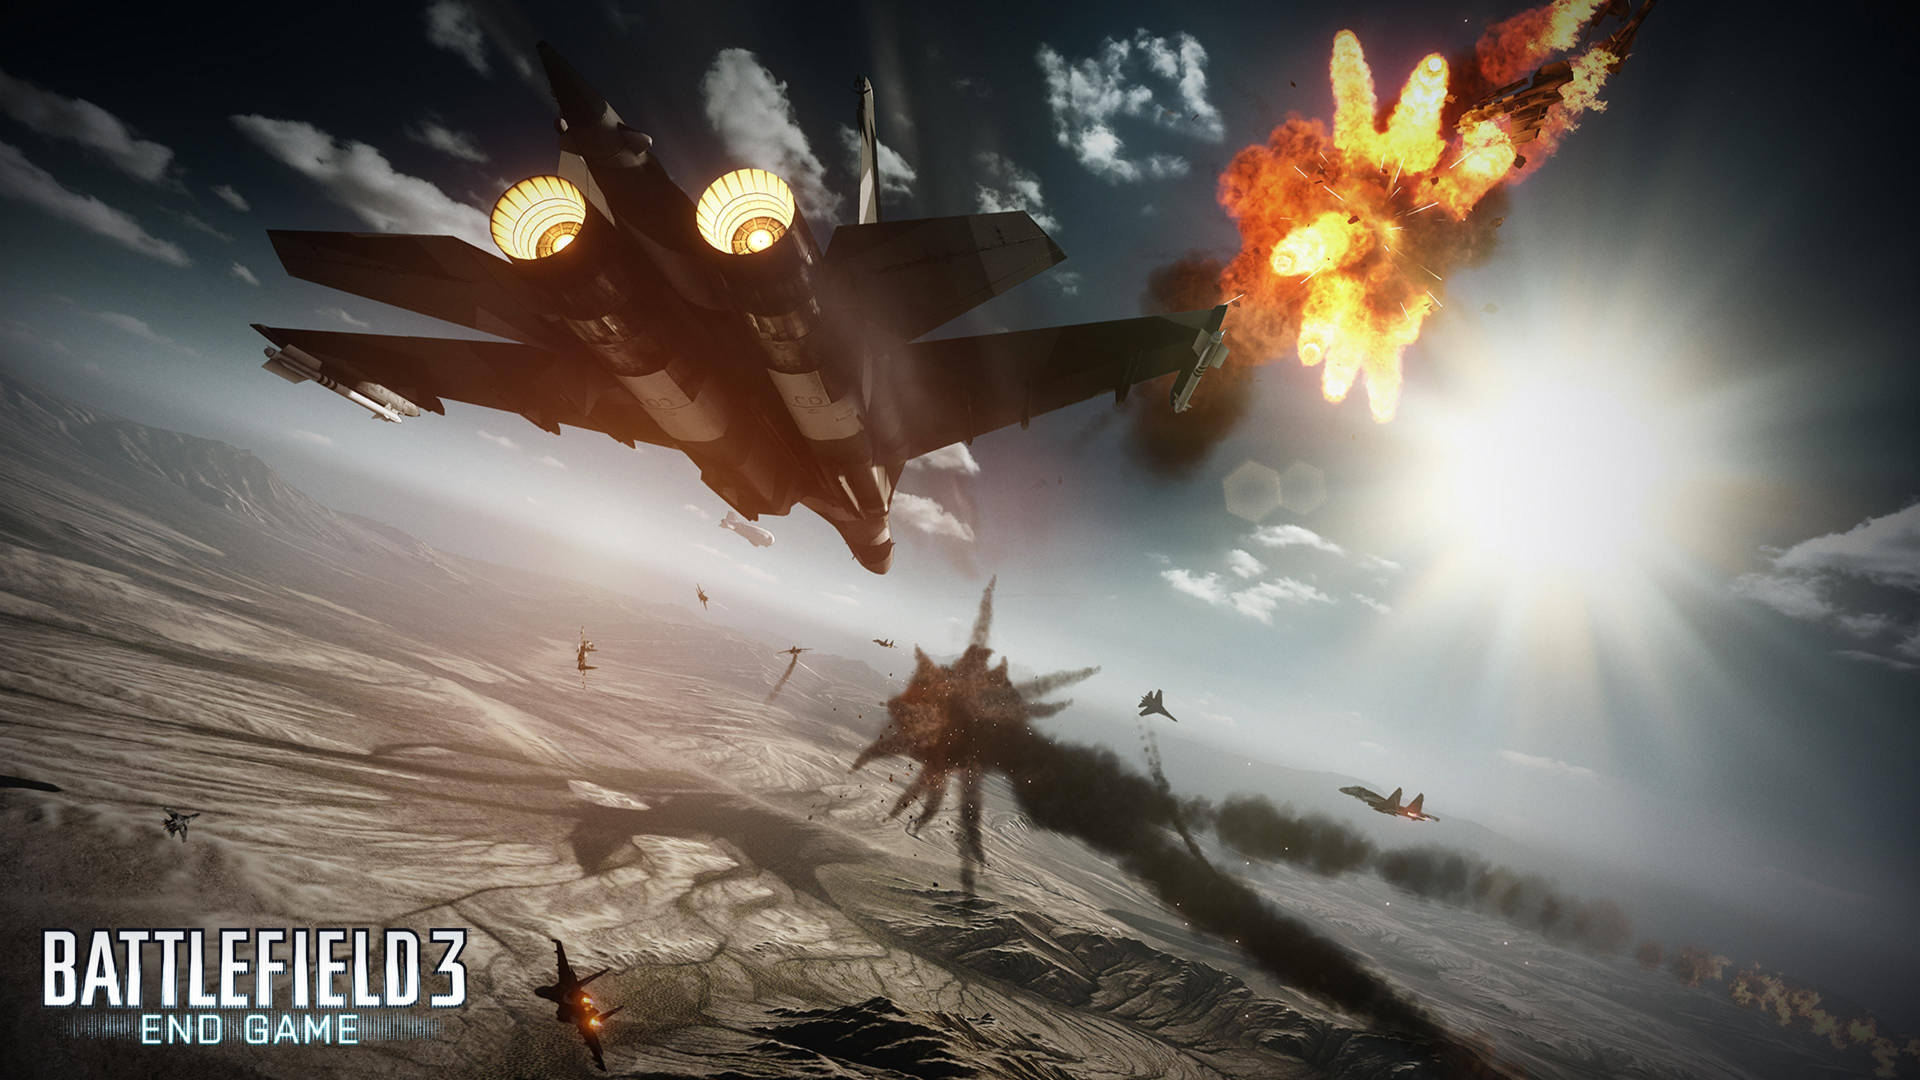 Feel the War Action with Cool Battlefield 3 Wallpaper